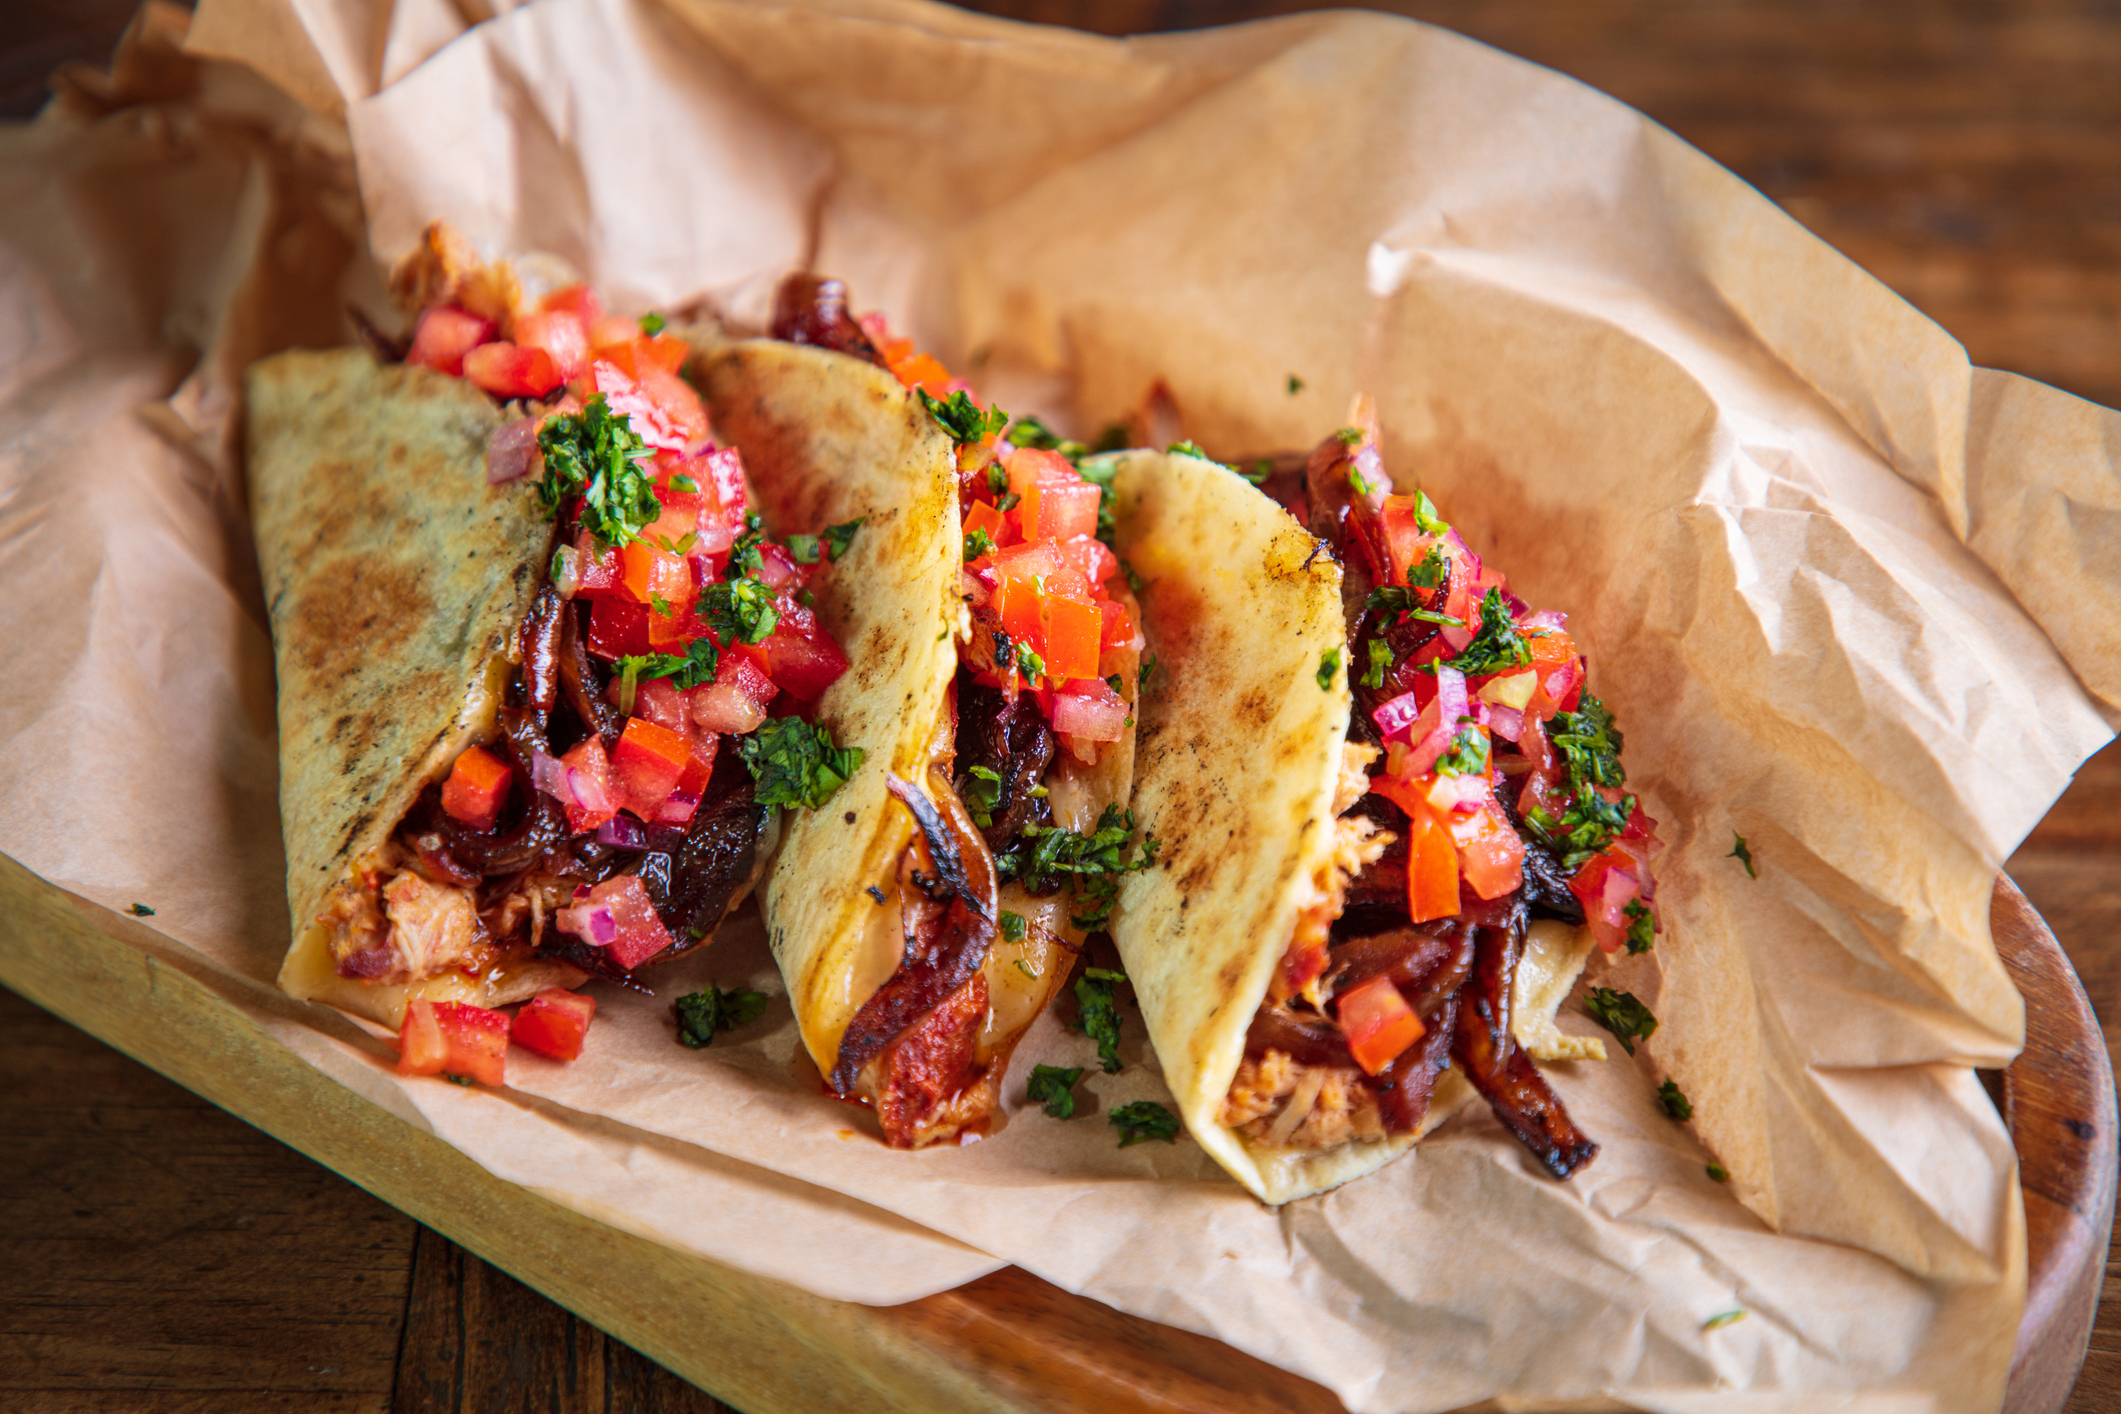 Serving of tacos with shredded roast pork and cheese filling on brown paper in wooden plate